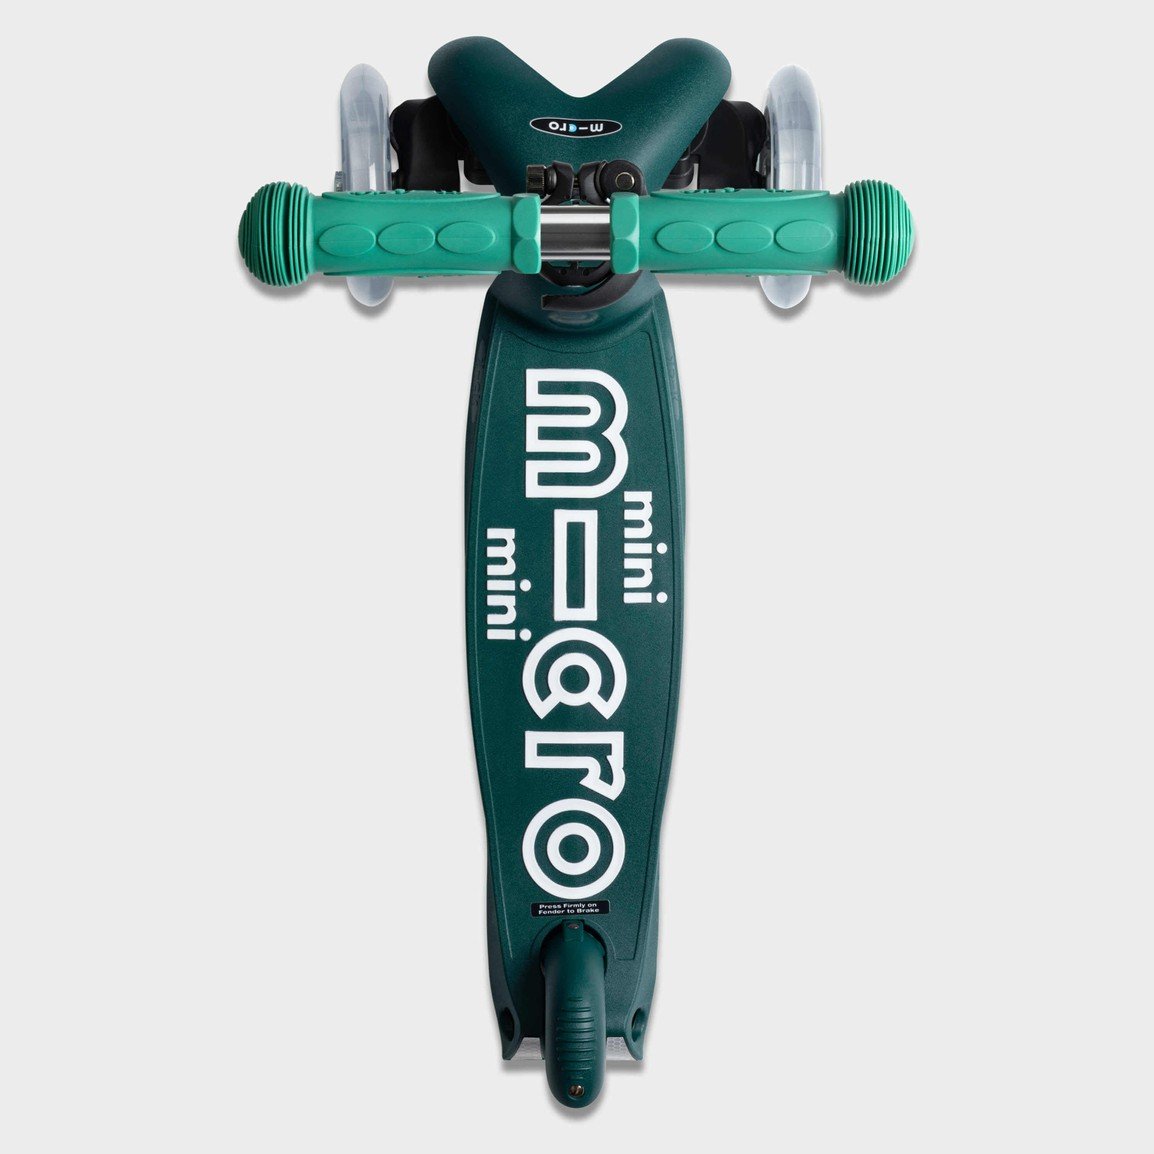 MICRO Mini eco friendly scooter (2-5 years old)